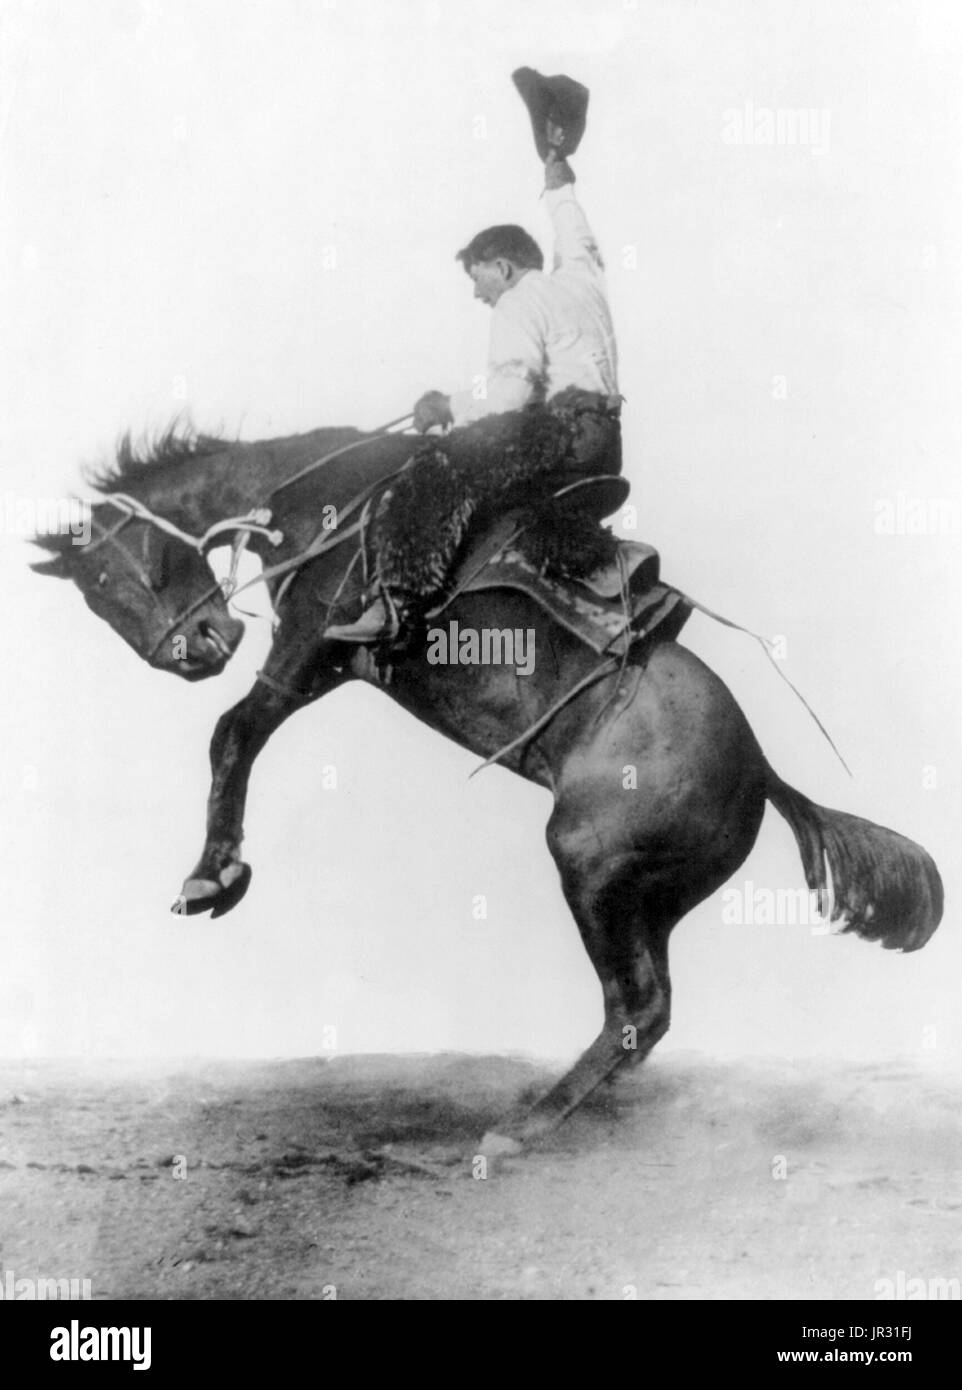 O'Donnell on Whirlwind, Cheyenne Frontier Days, 1911. Cowboys of the American West developed a personal culture of their own, a blend of frontier and Victorian values that even retained vestiges of chivalry. Such hazardous work in isolated conditions also bred a tradition of self-dependence and individualism, with great value put on personal honesty, exemplified in songs and poetry. The average cowboy earned approximately a dollar a day, plus food, and, when near the home ranch, a bed in the bunkhouse, usually a barracks-like building with a single open room. Bucking is a movement performed by Stock Photo